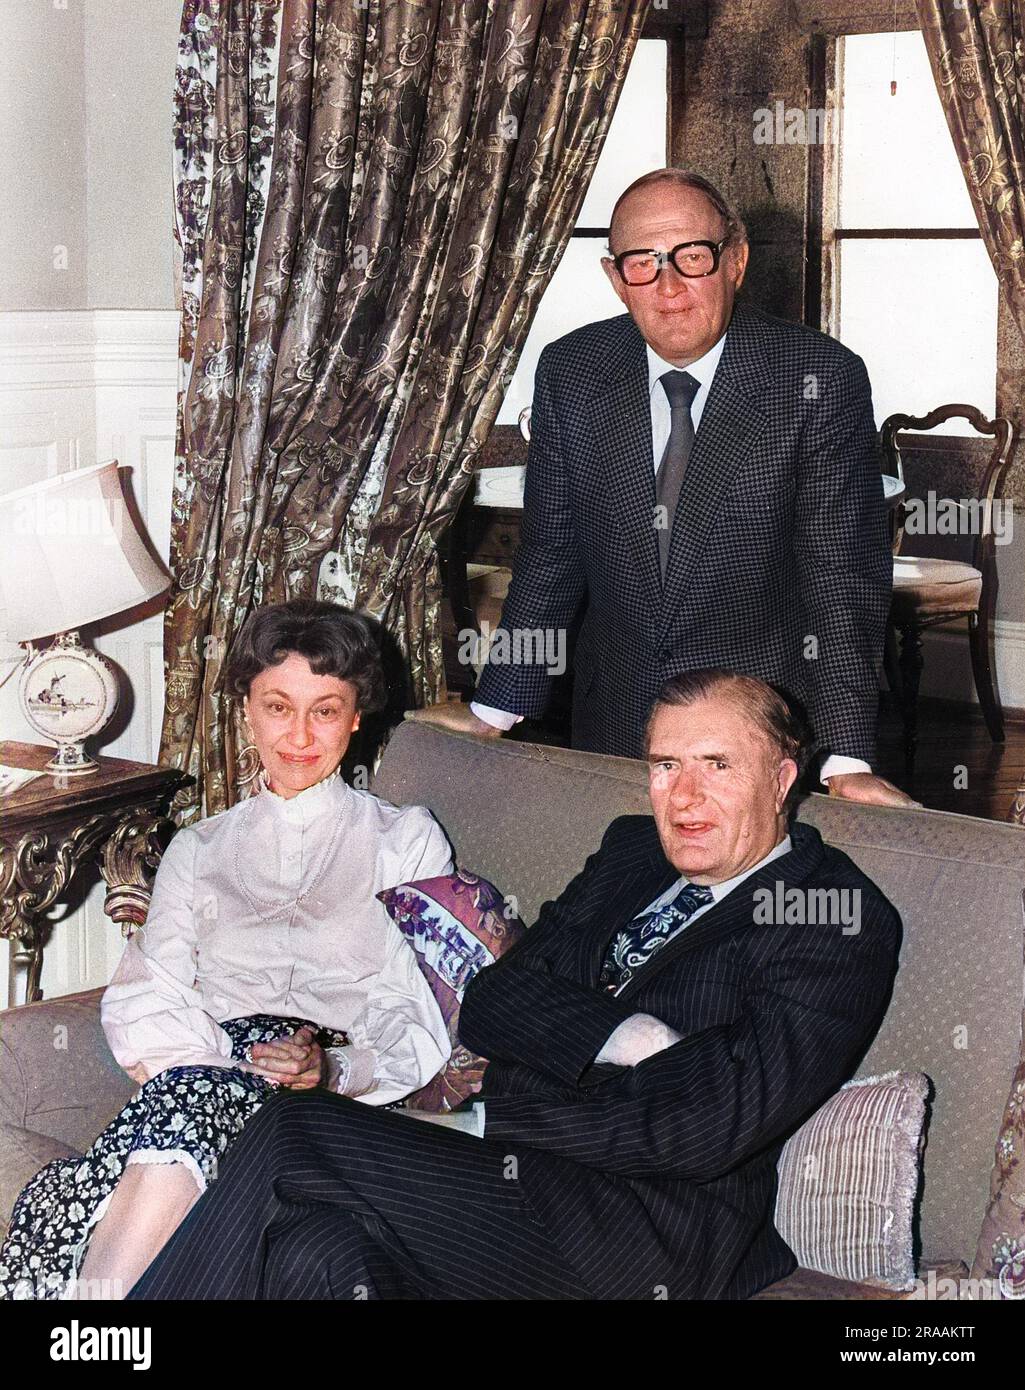 Robert Robinson (1927-2011), radio and TV presenter, journalist and author, with Lord John Francis Arthur St Aubyn, 4th Baron St Levan (1919-2013), and his wife Lady Susan St Levan (d 2003), at their home on St Michael's Mount, Cornwall.     Date: circa 1970s Stock Photo